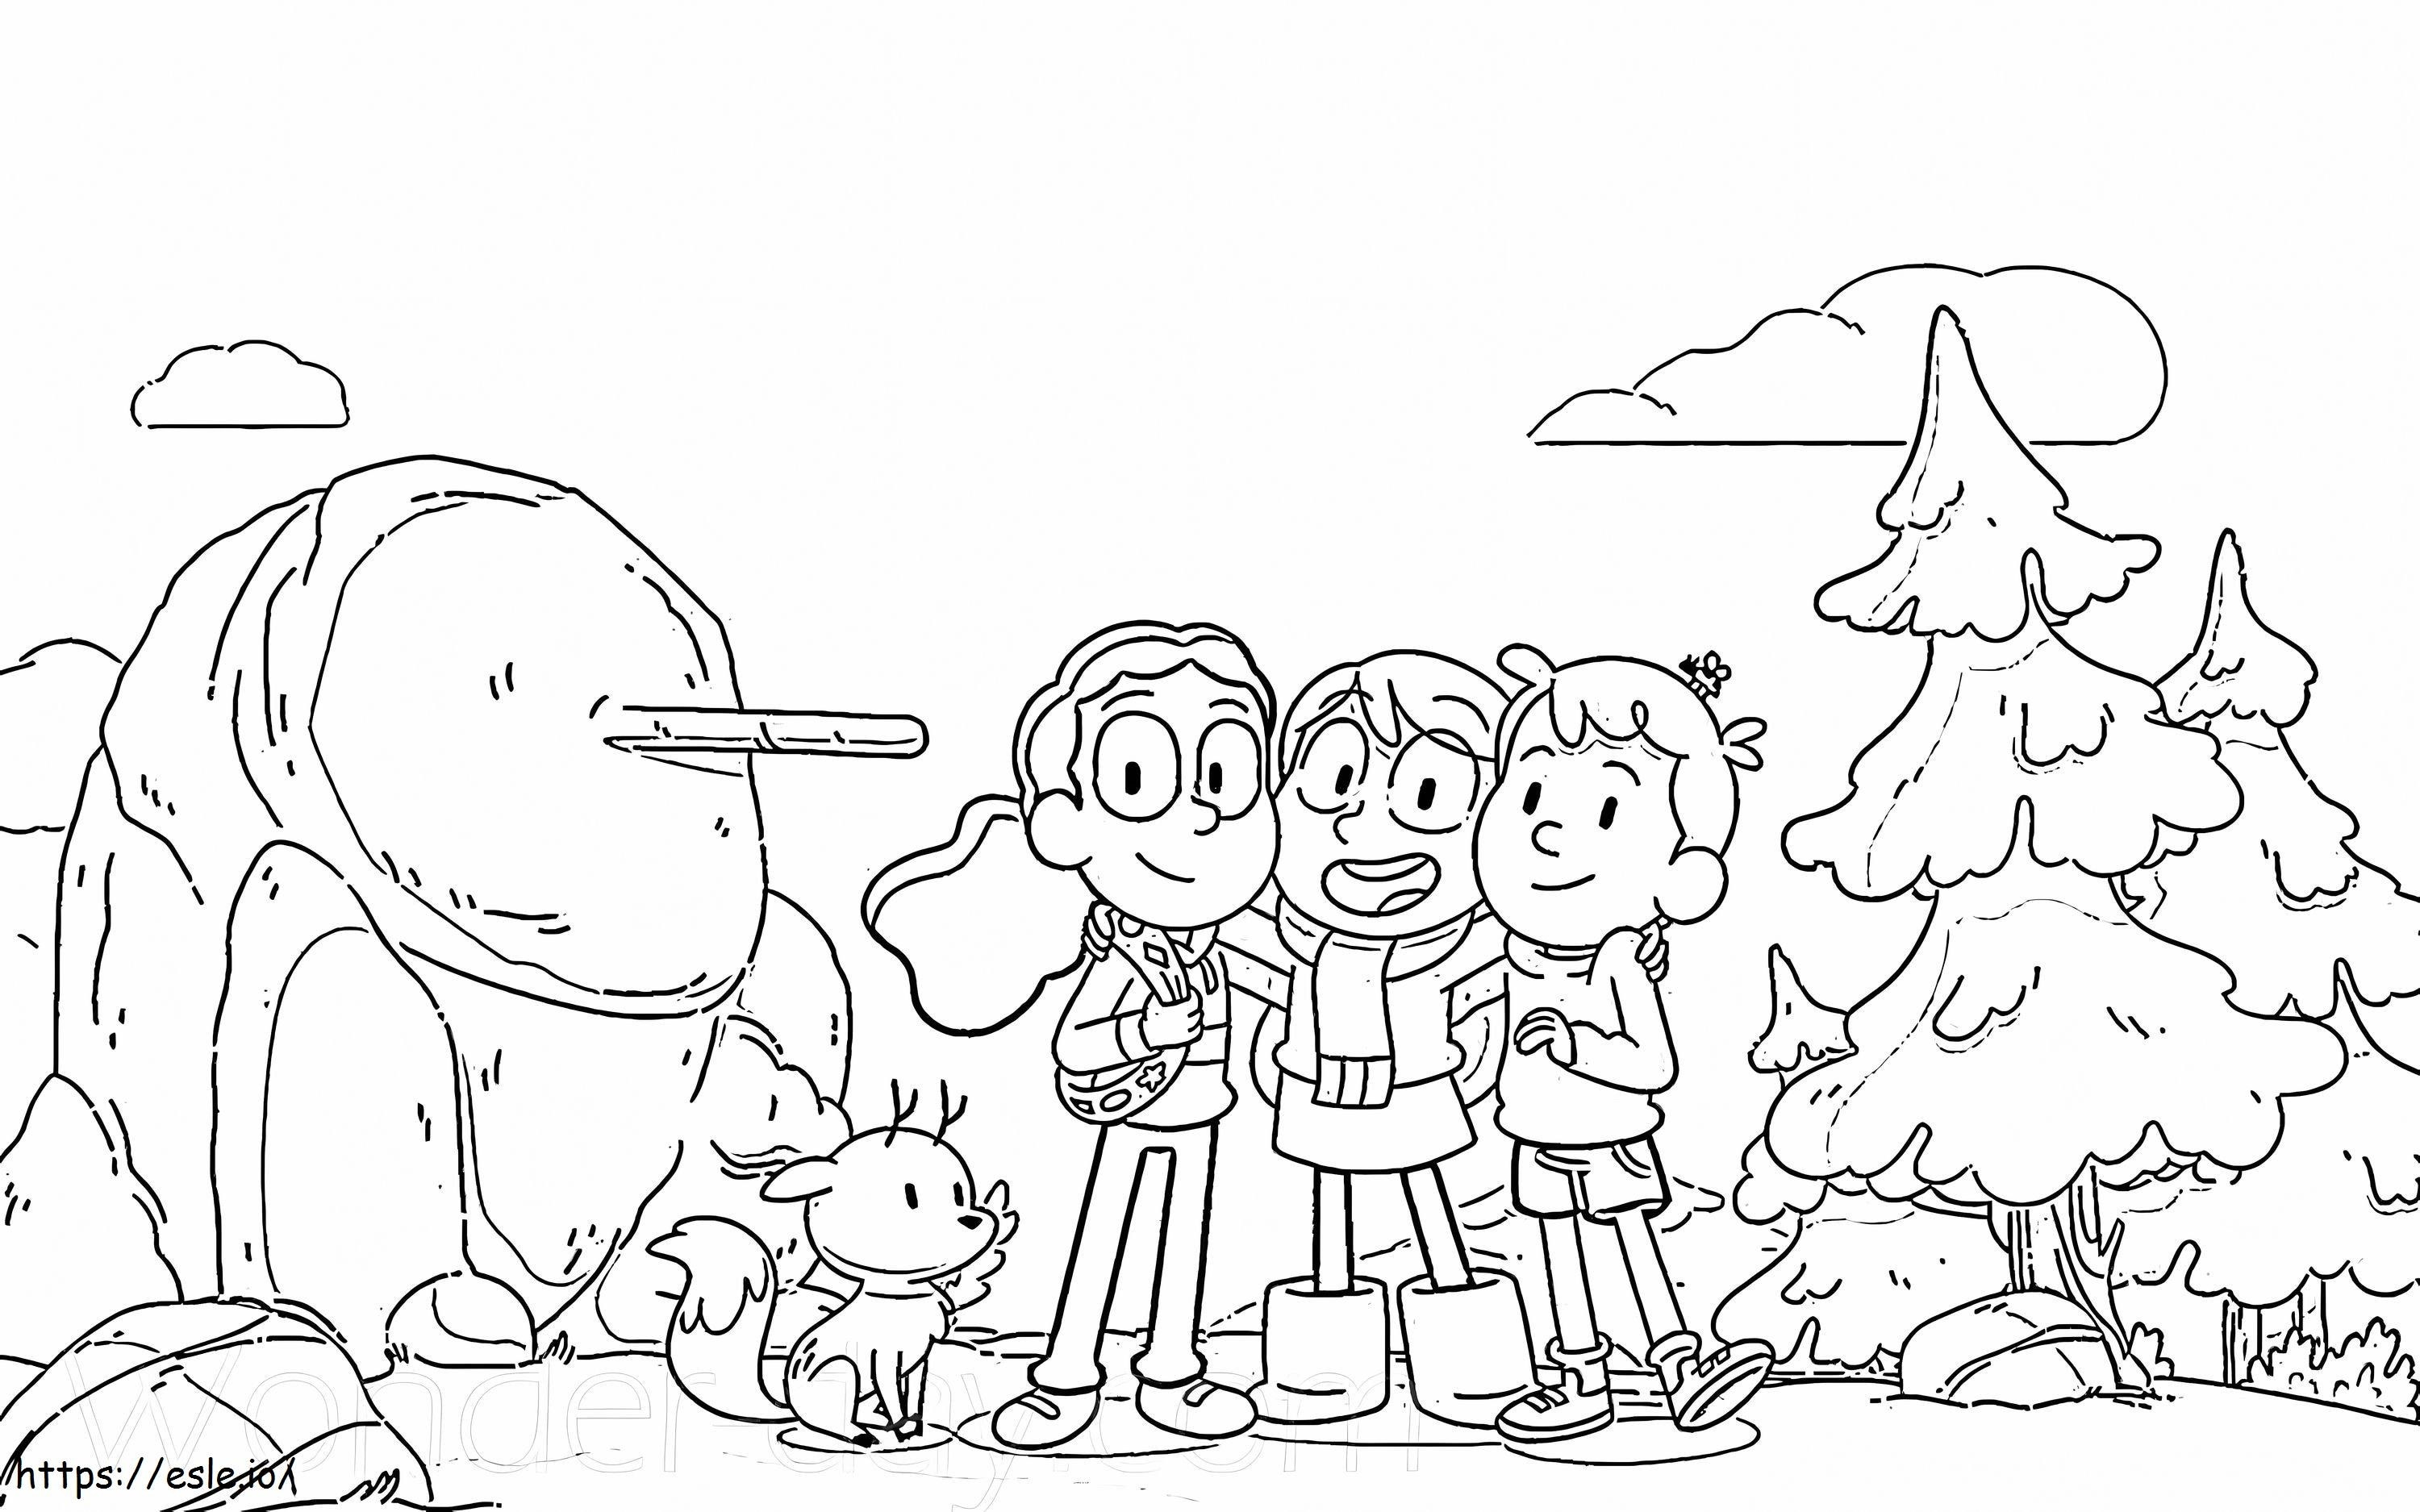 Hilda And Her Friends coloring page